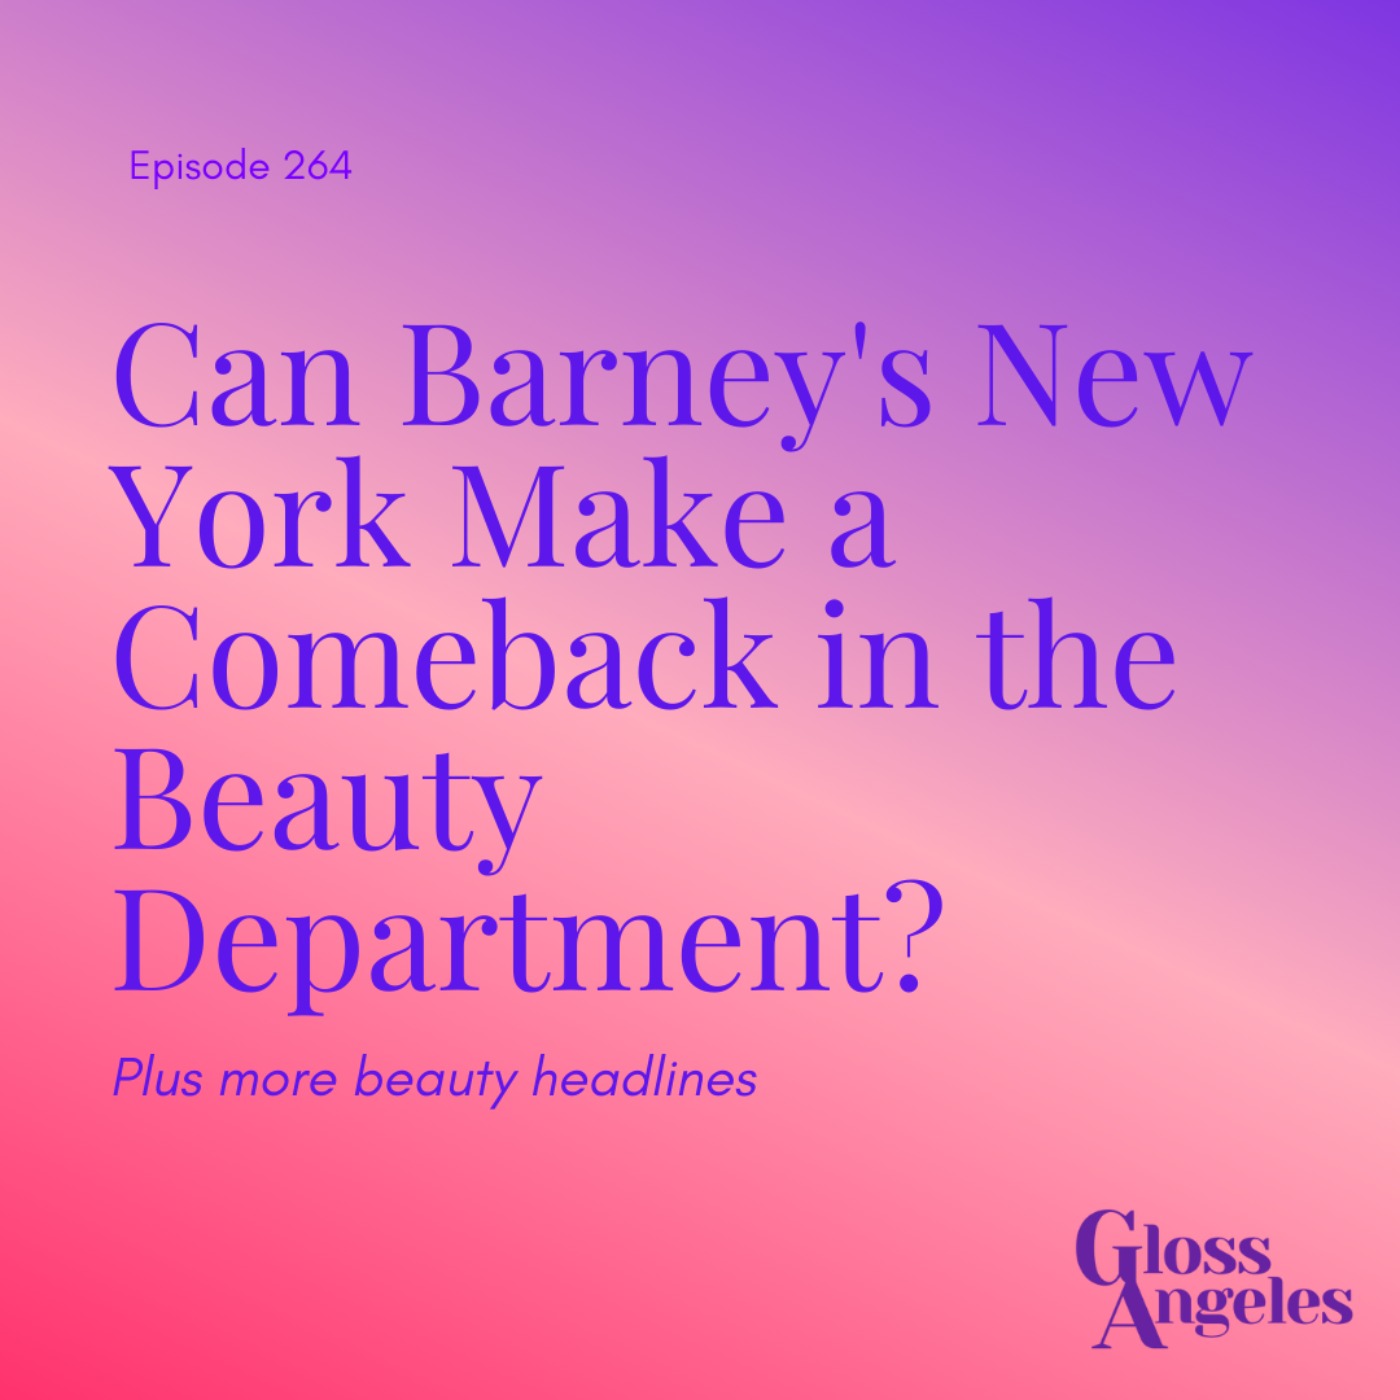 Can Barney's New York Make a Comeback in the Beauty Department?